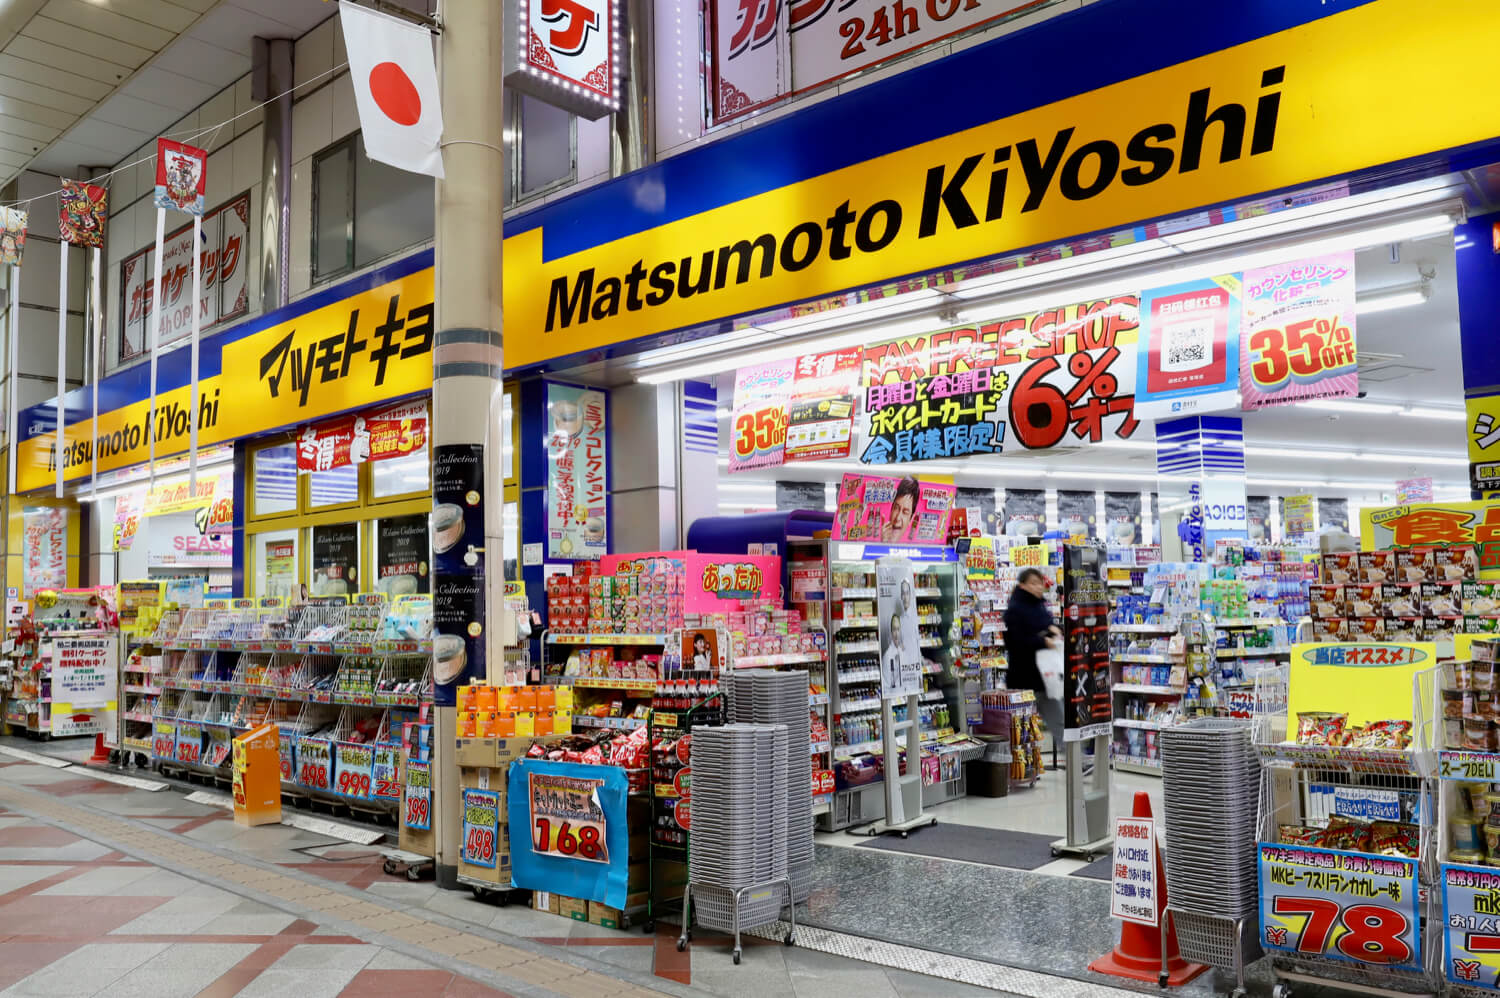 Matsumoto Kyoshi now has over 1,600 stores in Japan.